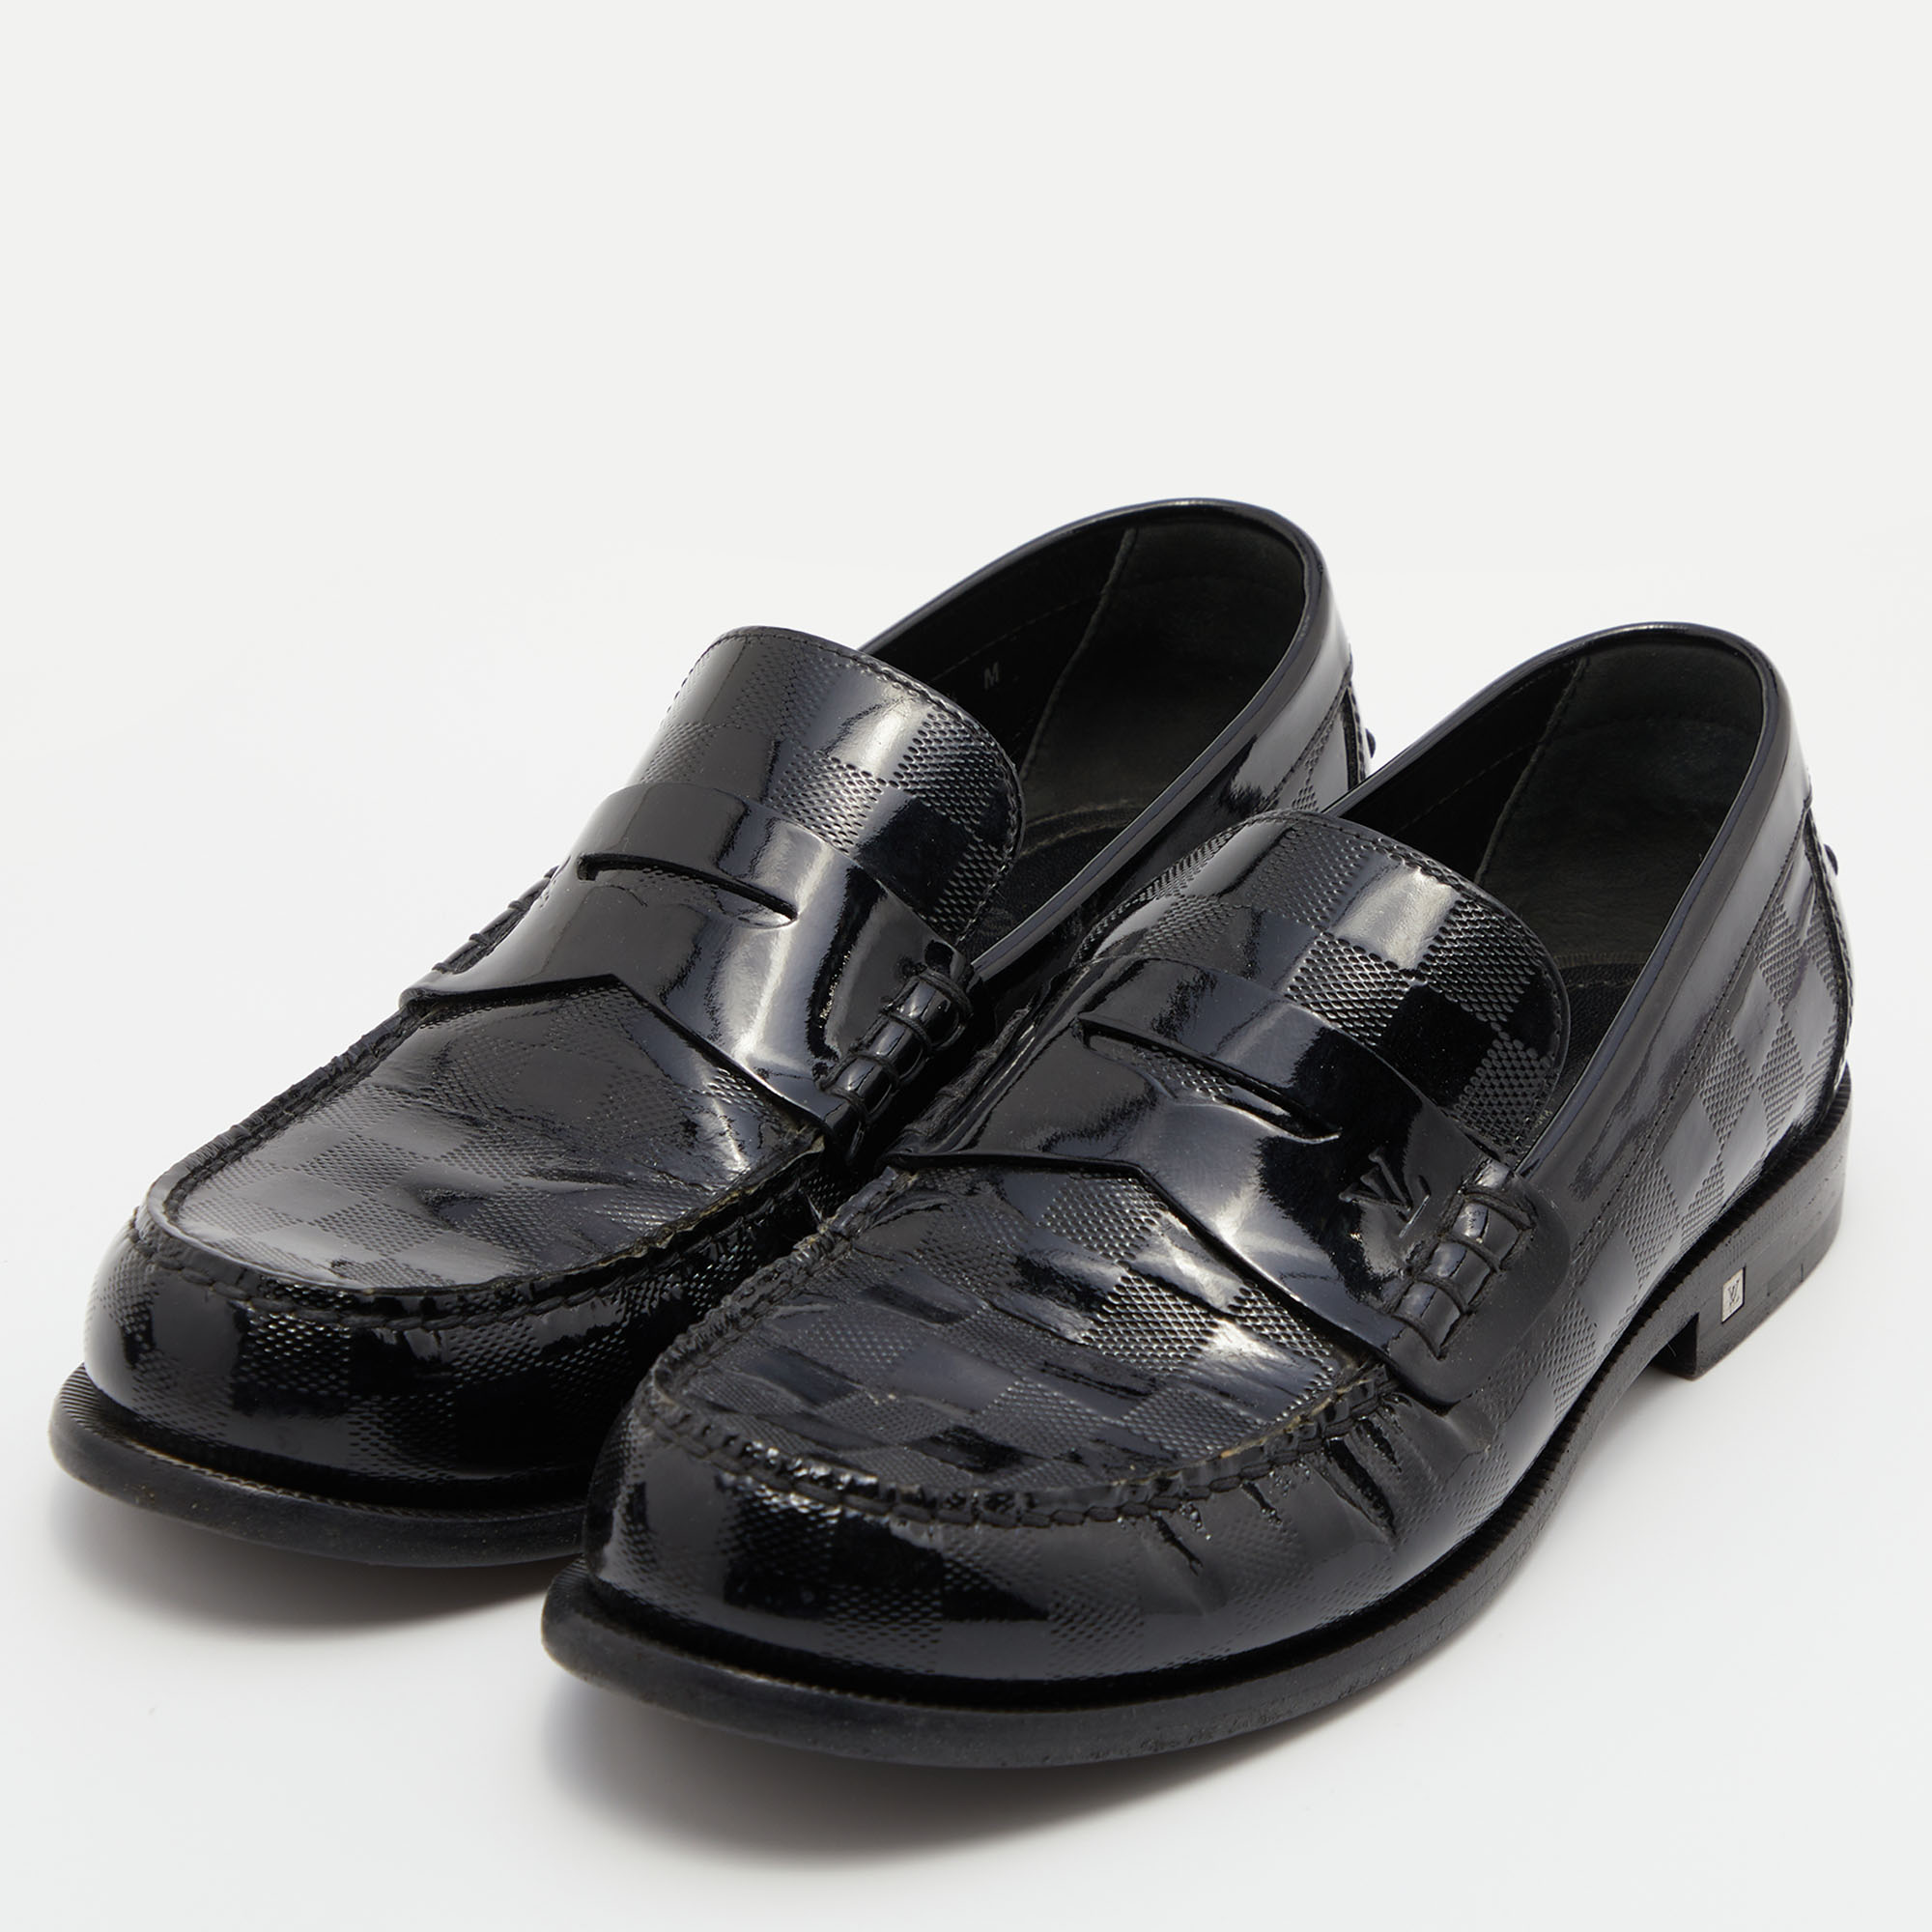 

Louis Vuitton Black Damier Infini Patent Leather Loafers Size